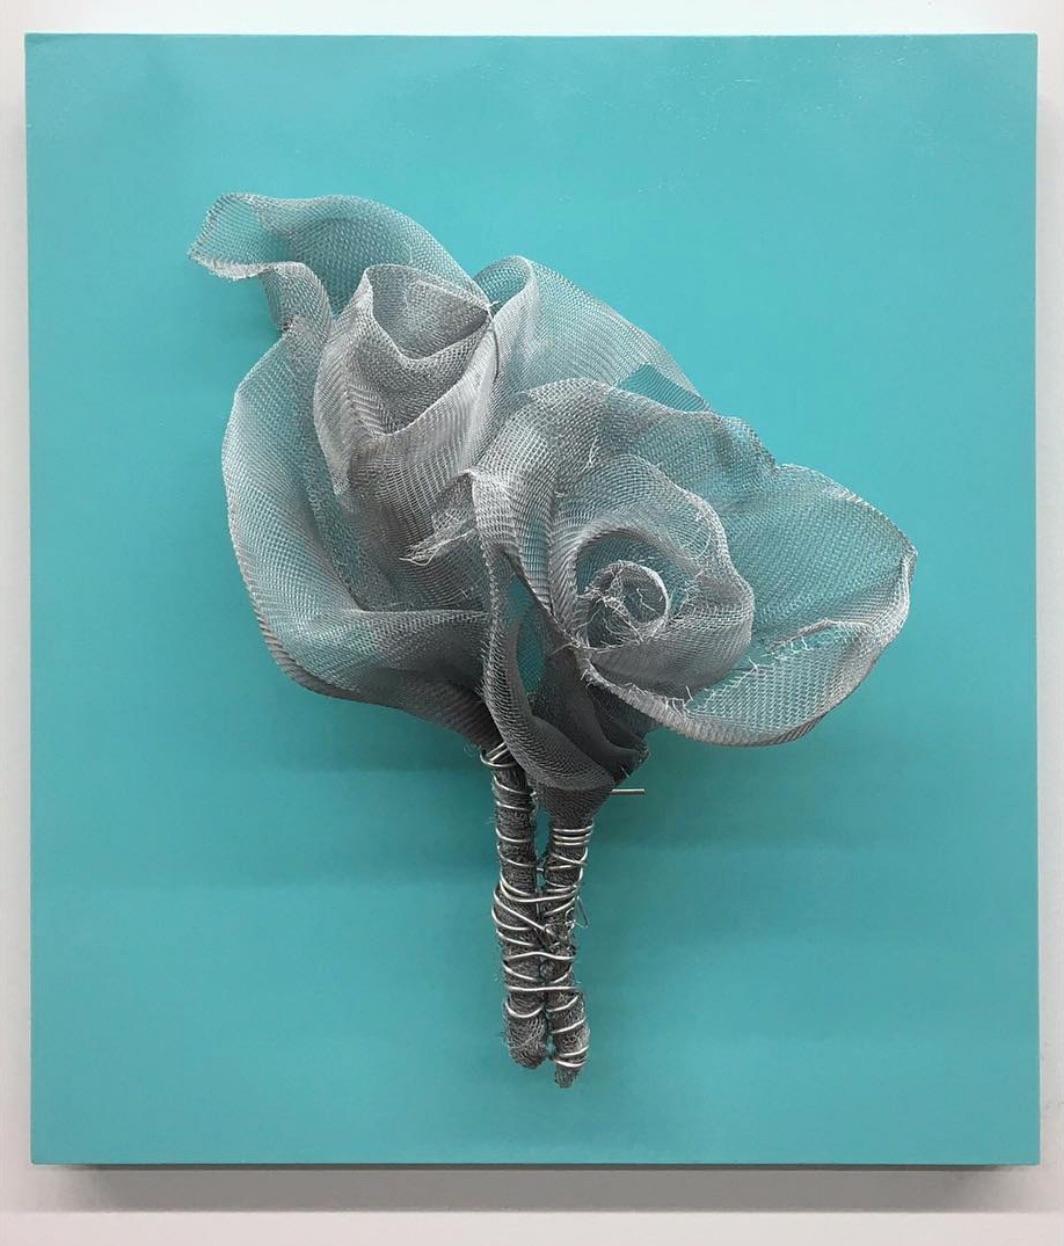 ROSES DELICIOUS sculpture by Melanie Newcombe 7